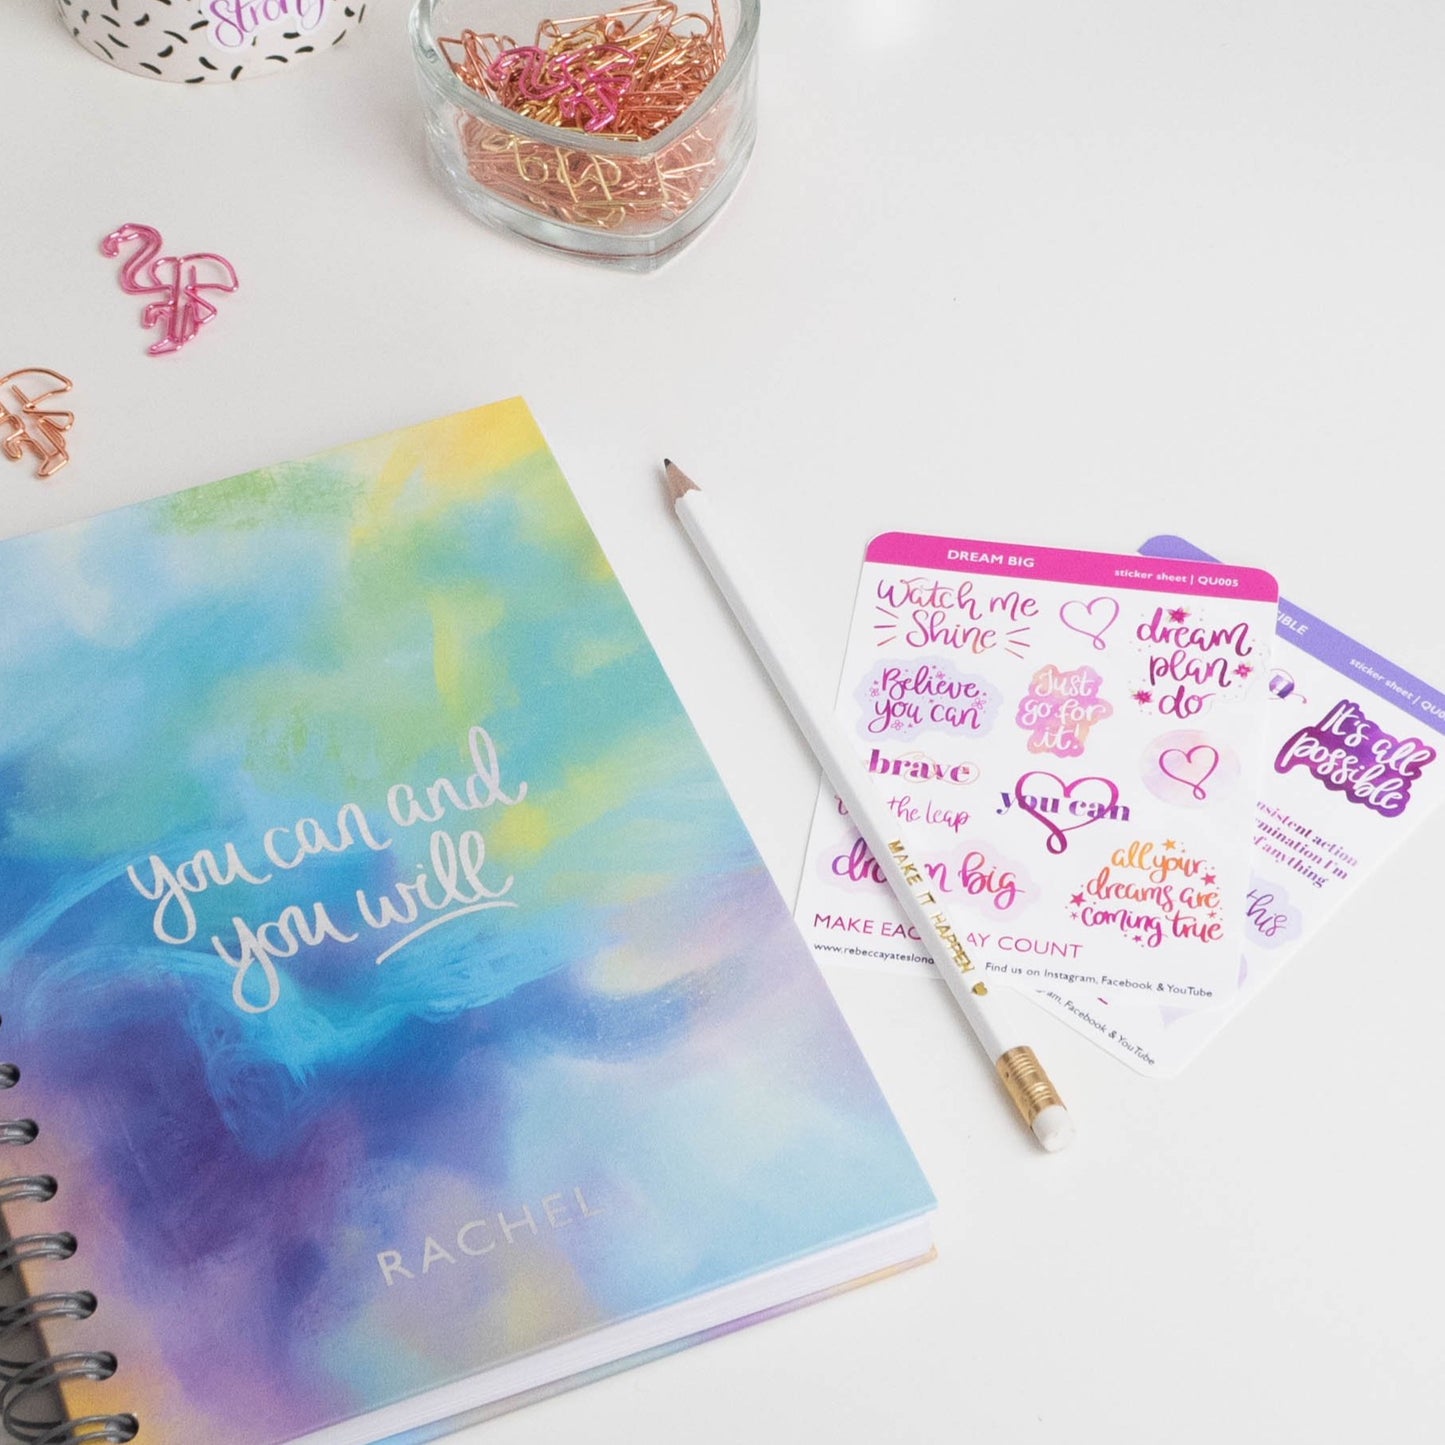 IT'S ALL POSSIBLE - QUOTES PLANNER STICKERS